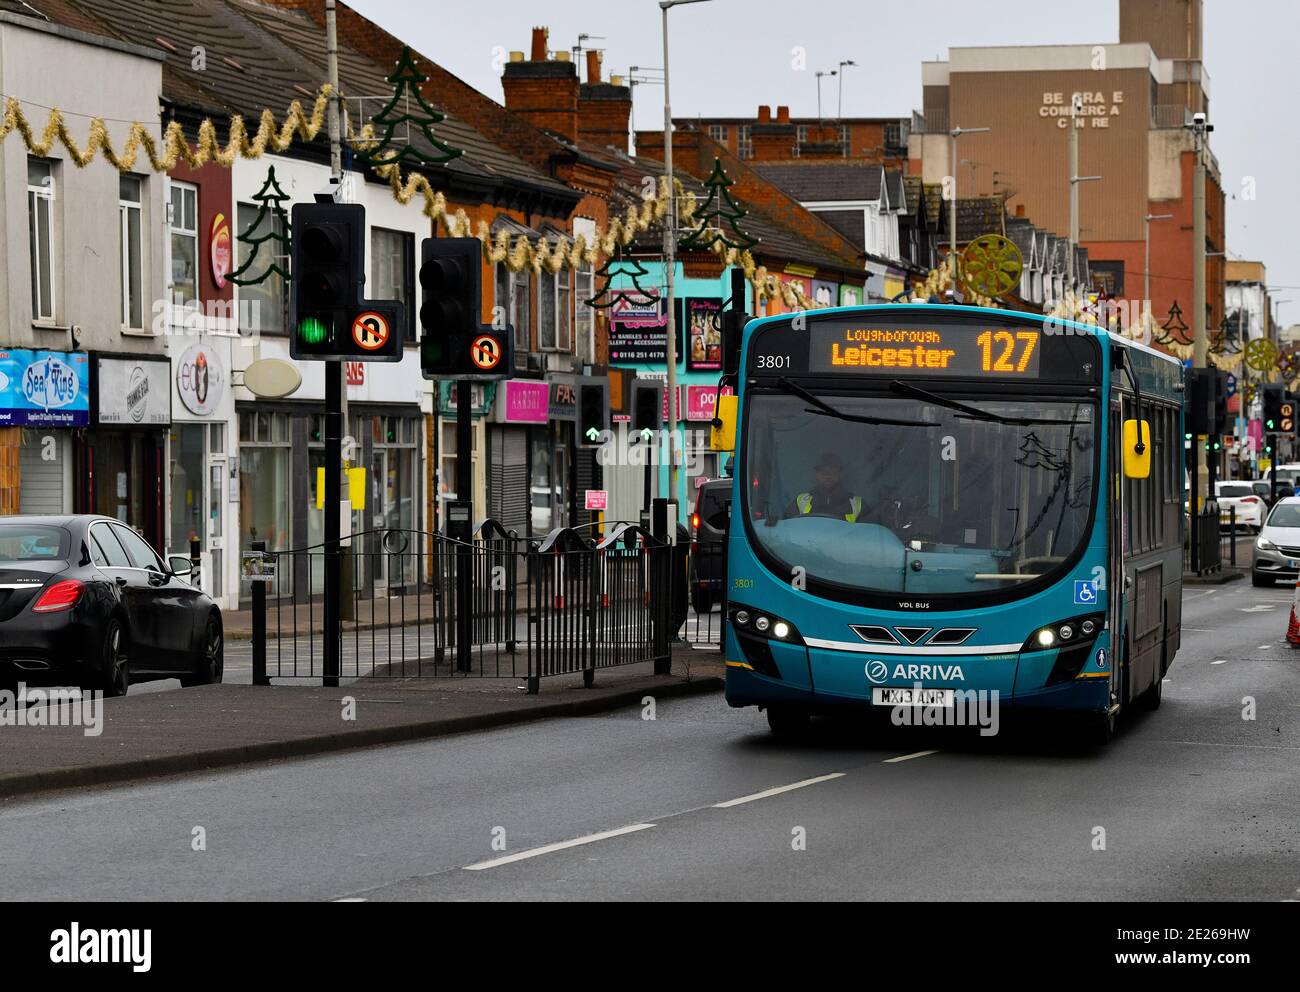 Arriva bus on Leicester's golden mile. Stock Photo